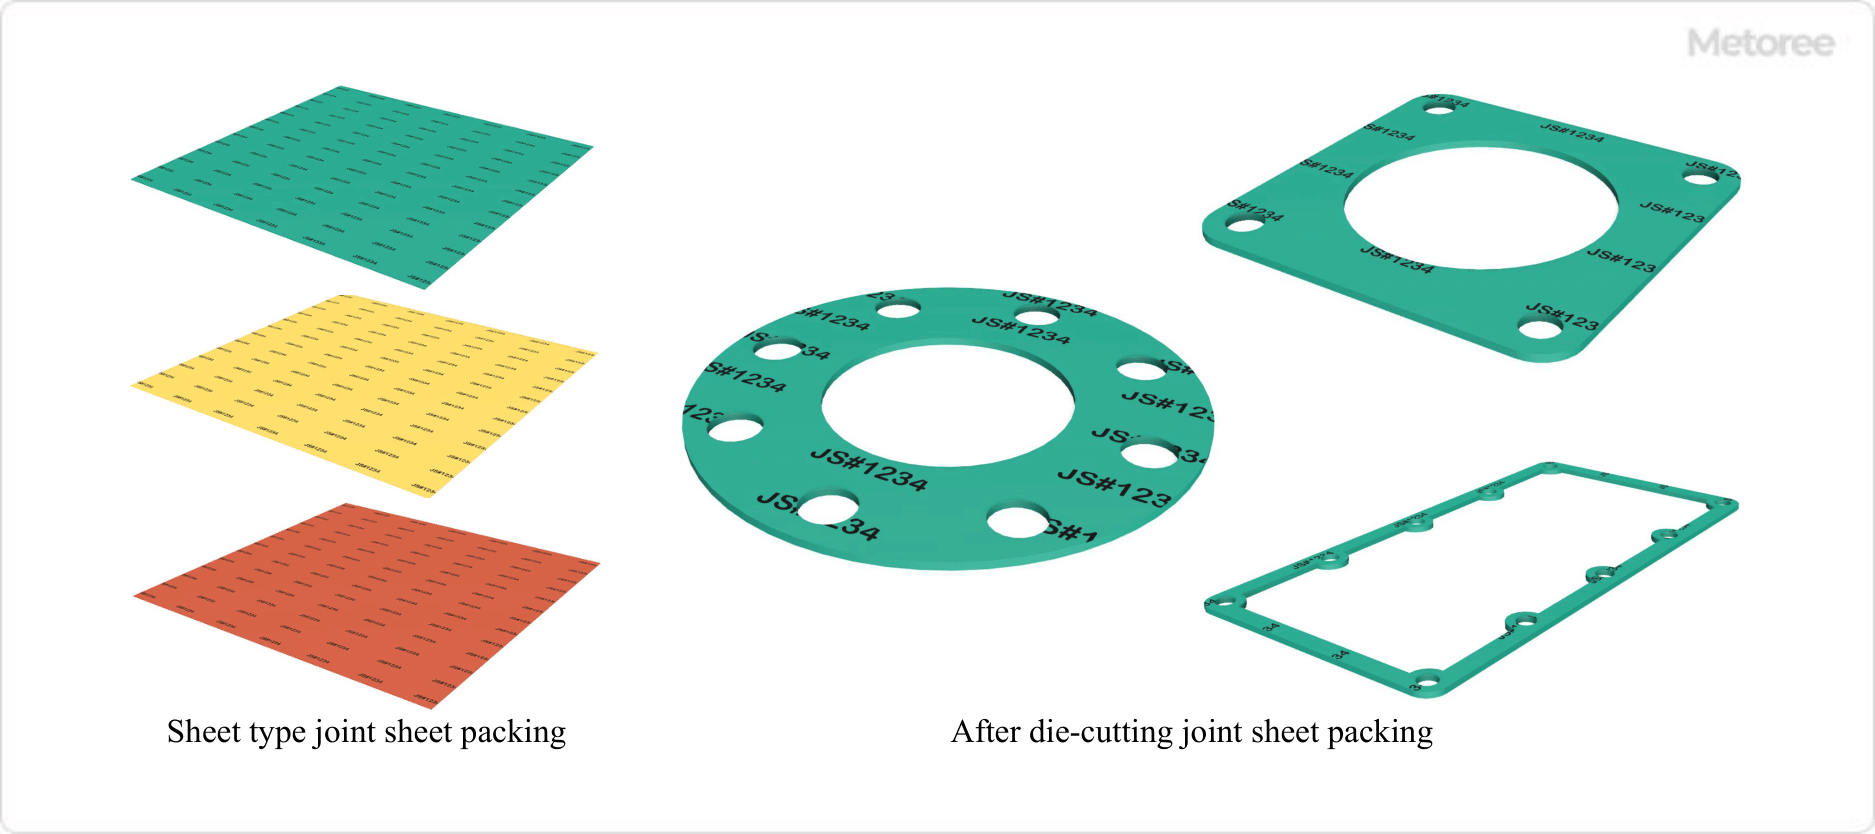 Figure 3. Joint sheet packing